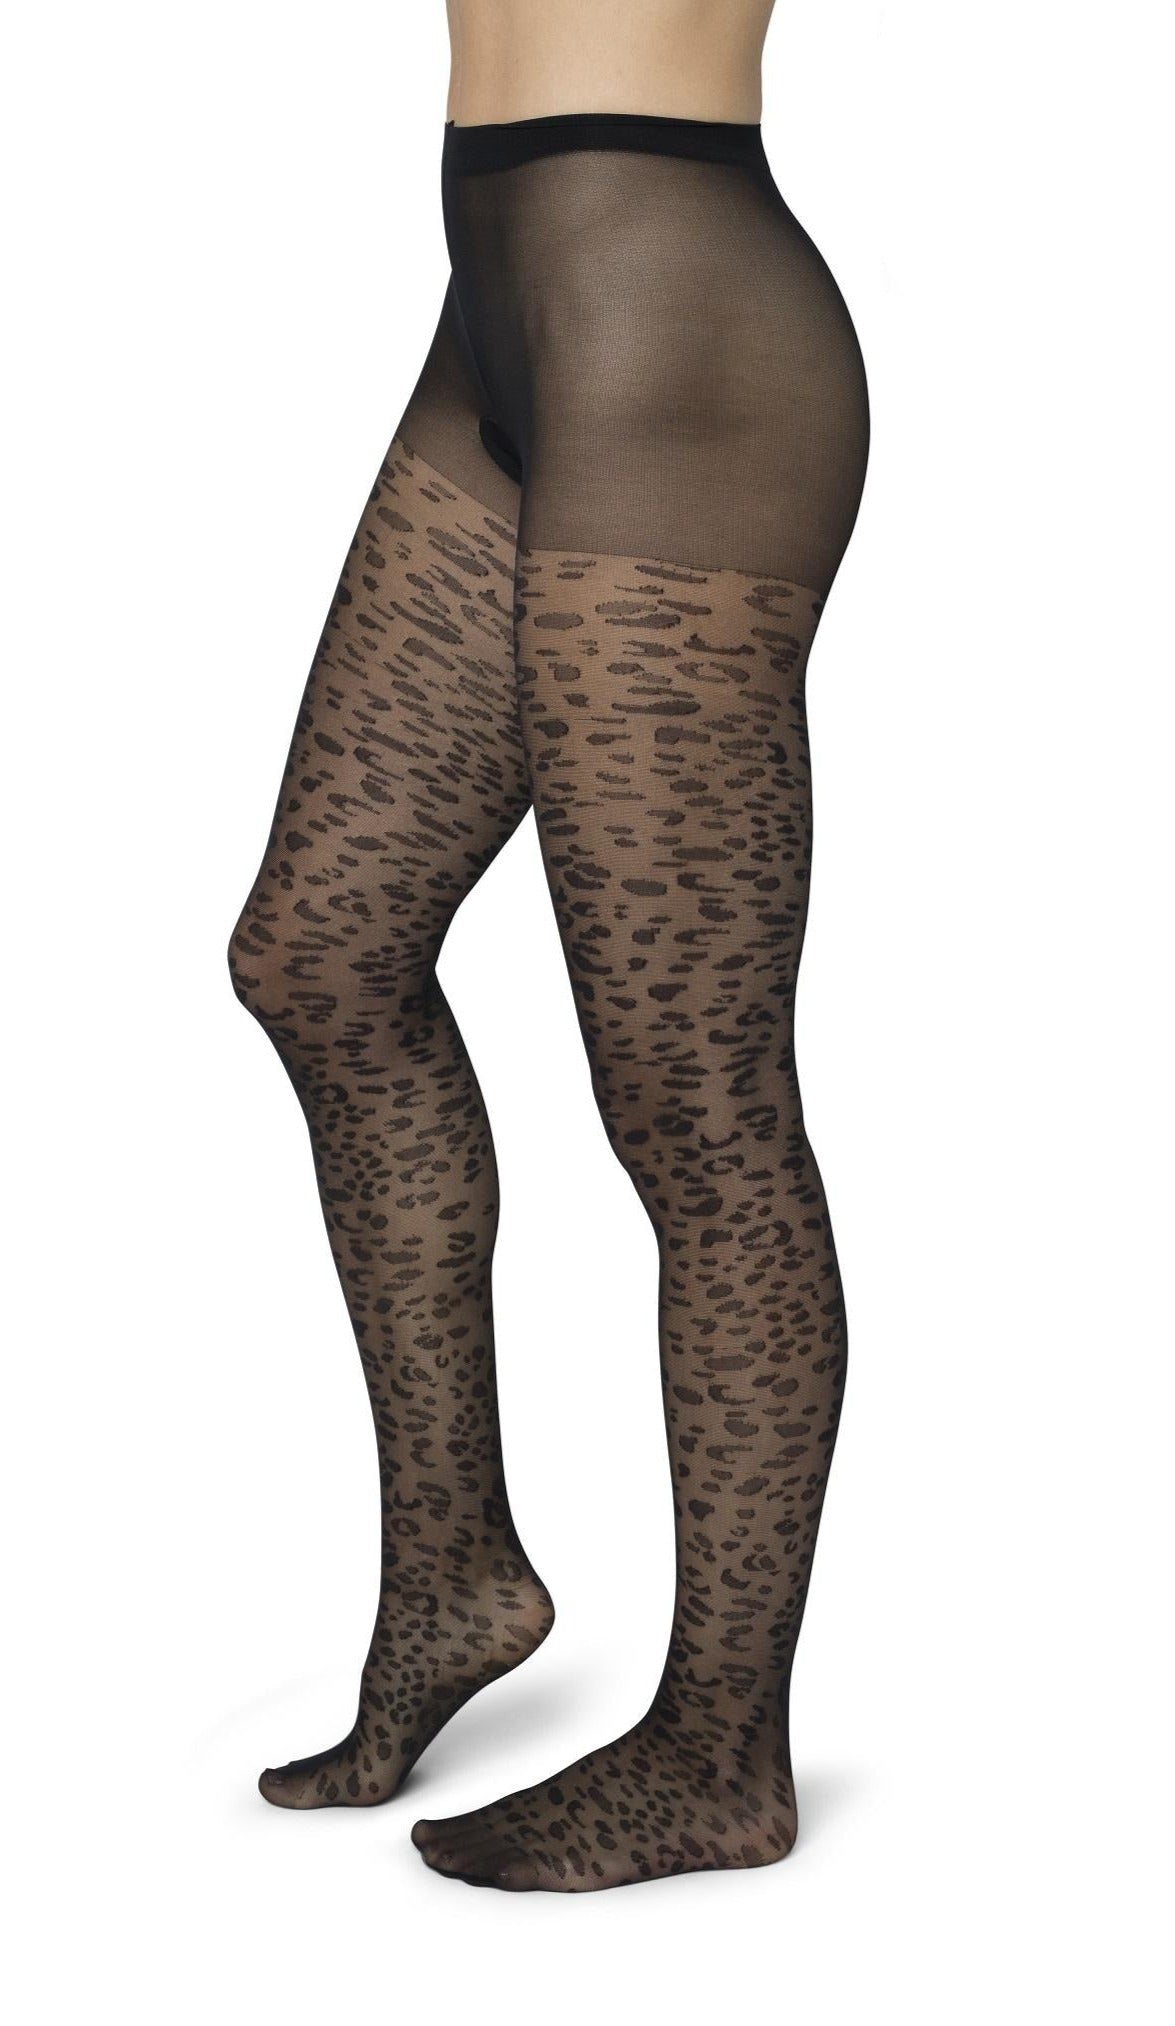 Bonnie Doon Panther Tights - Cream ivory sheer fashion tights with a leopard print pattern.